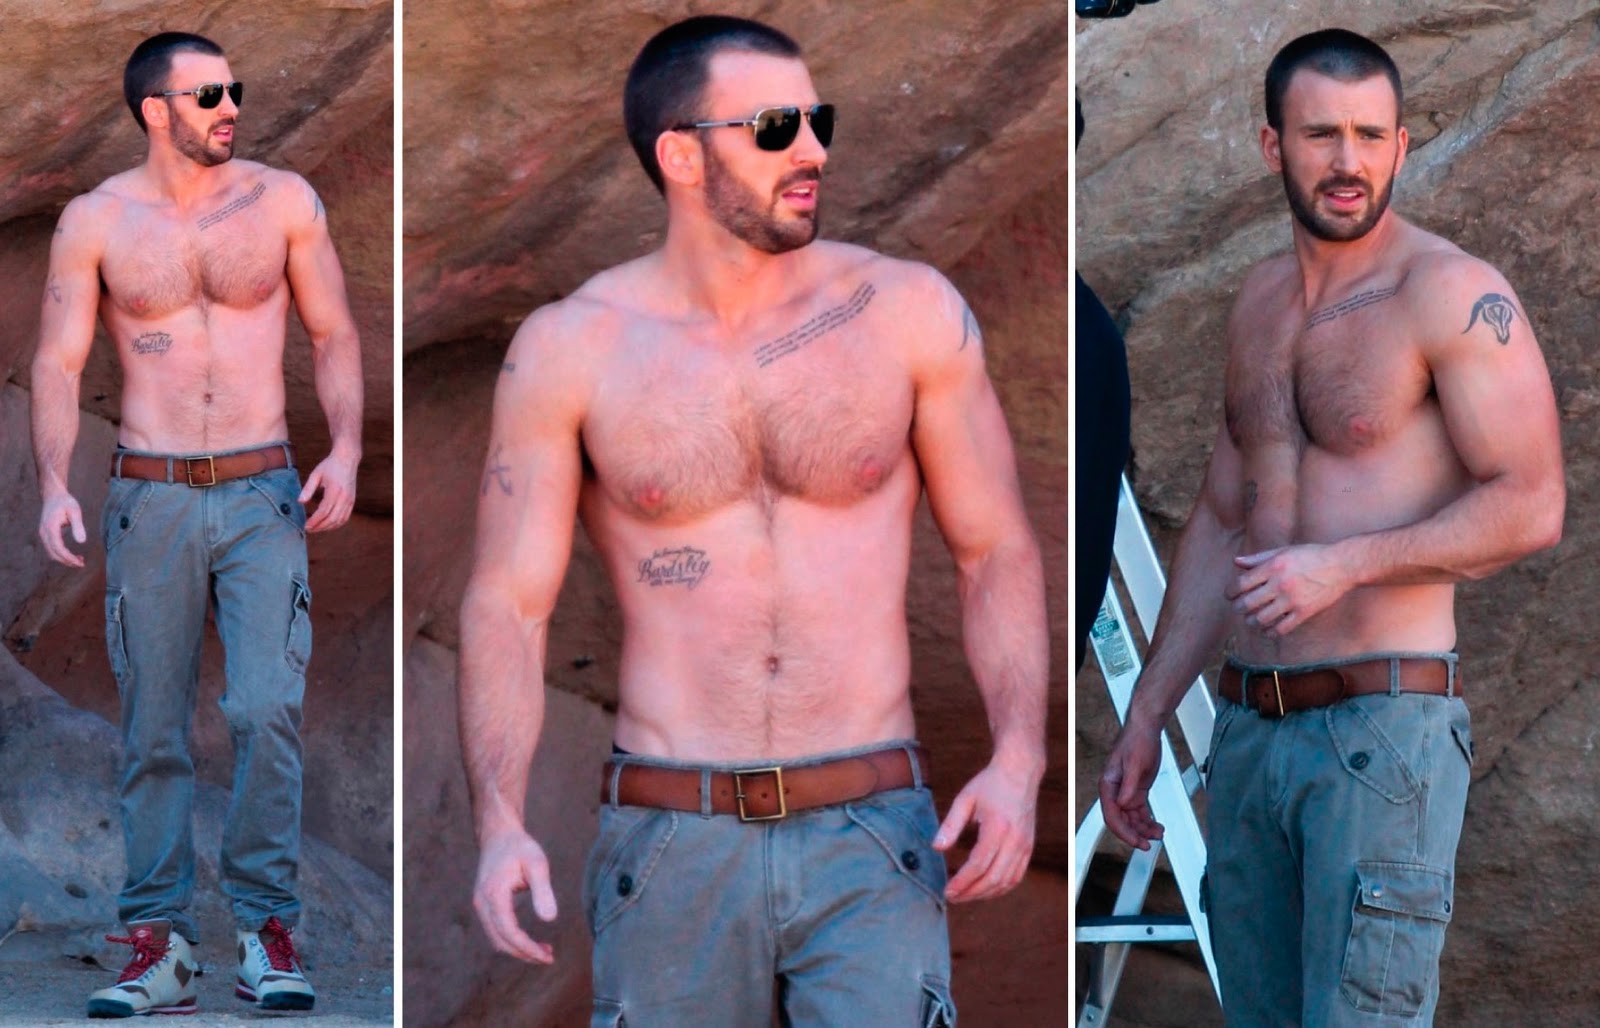 I mean besides the whole "shirtless Chris Evans" thing, which is ...